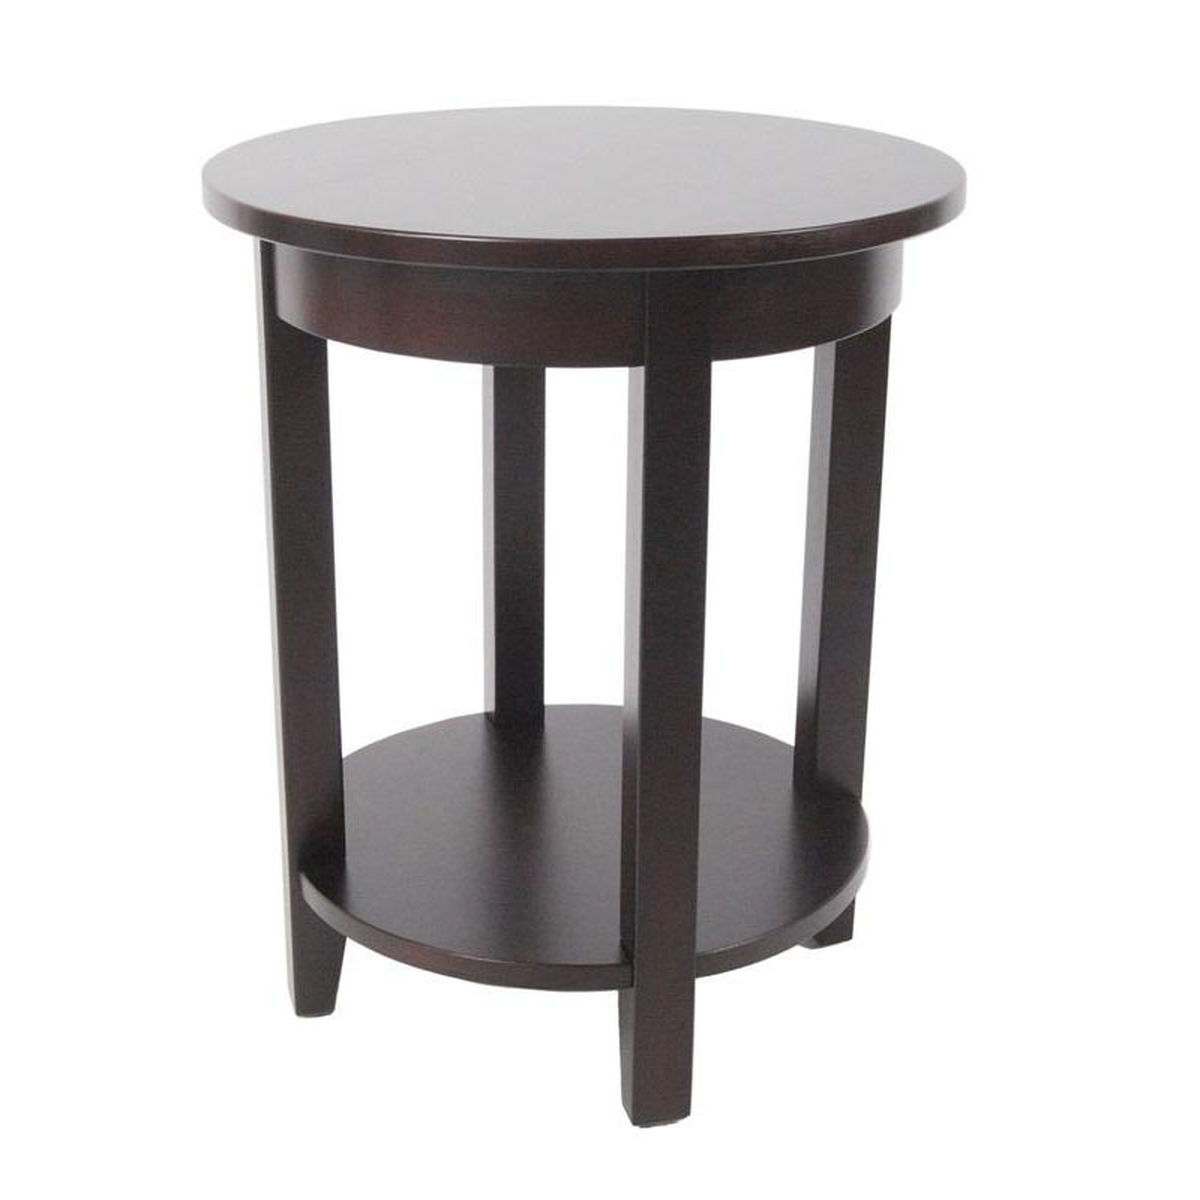 shaker cottage wooden diameter round accent table with storage shelf espresso bolton furniture bol main grey our carpet reducer nautical bar lights chinese bedside lamps patio